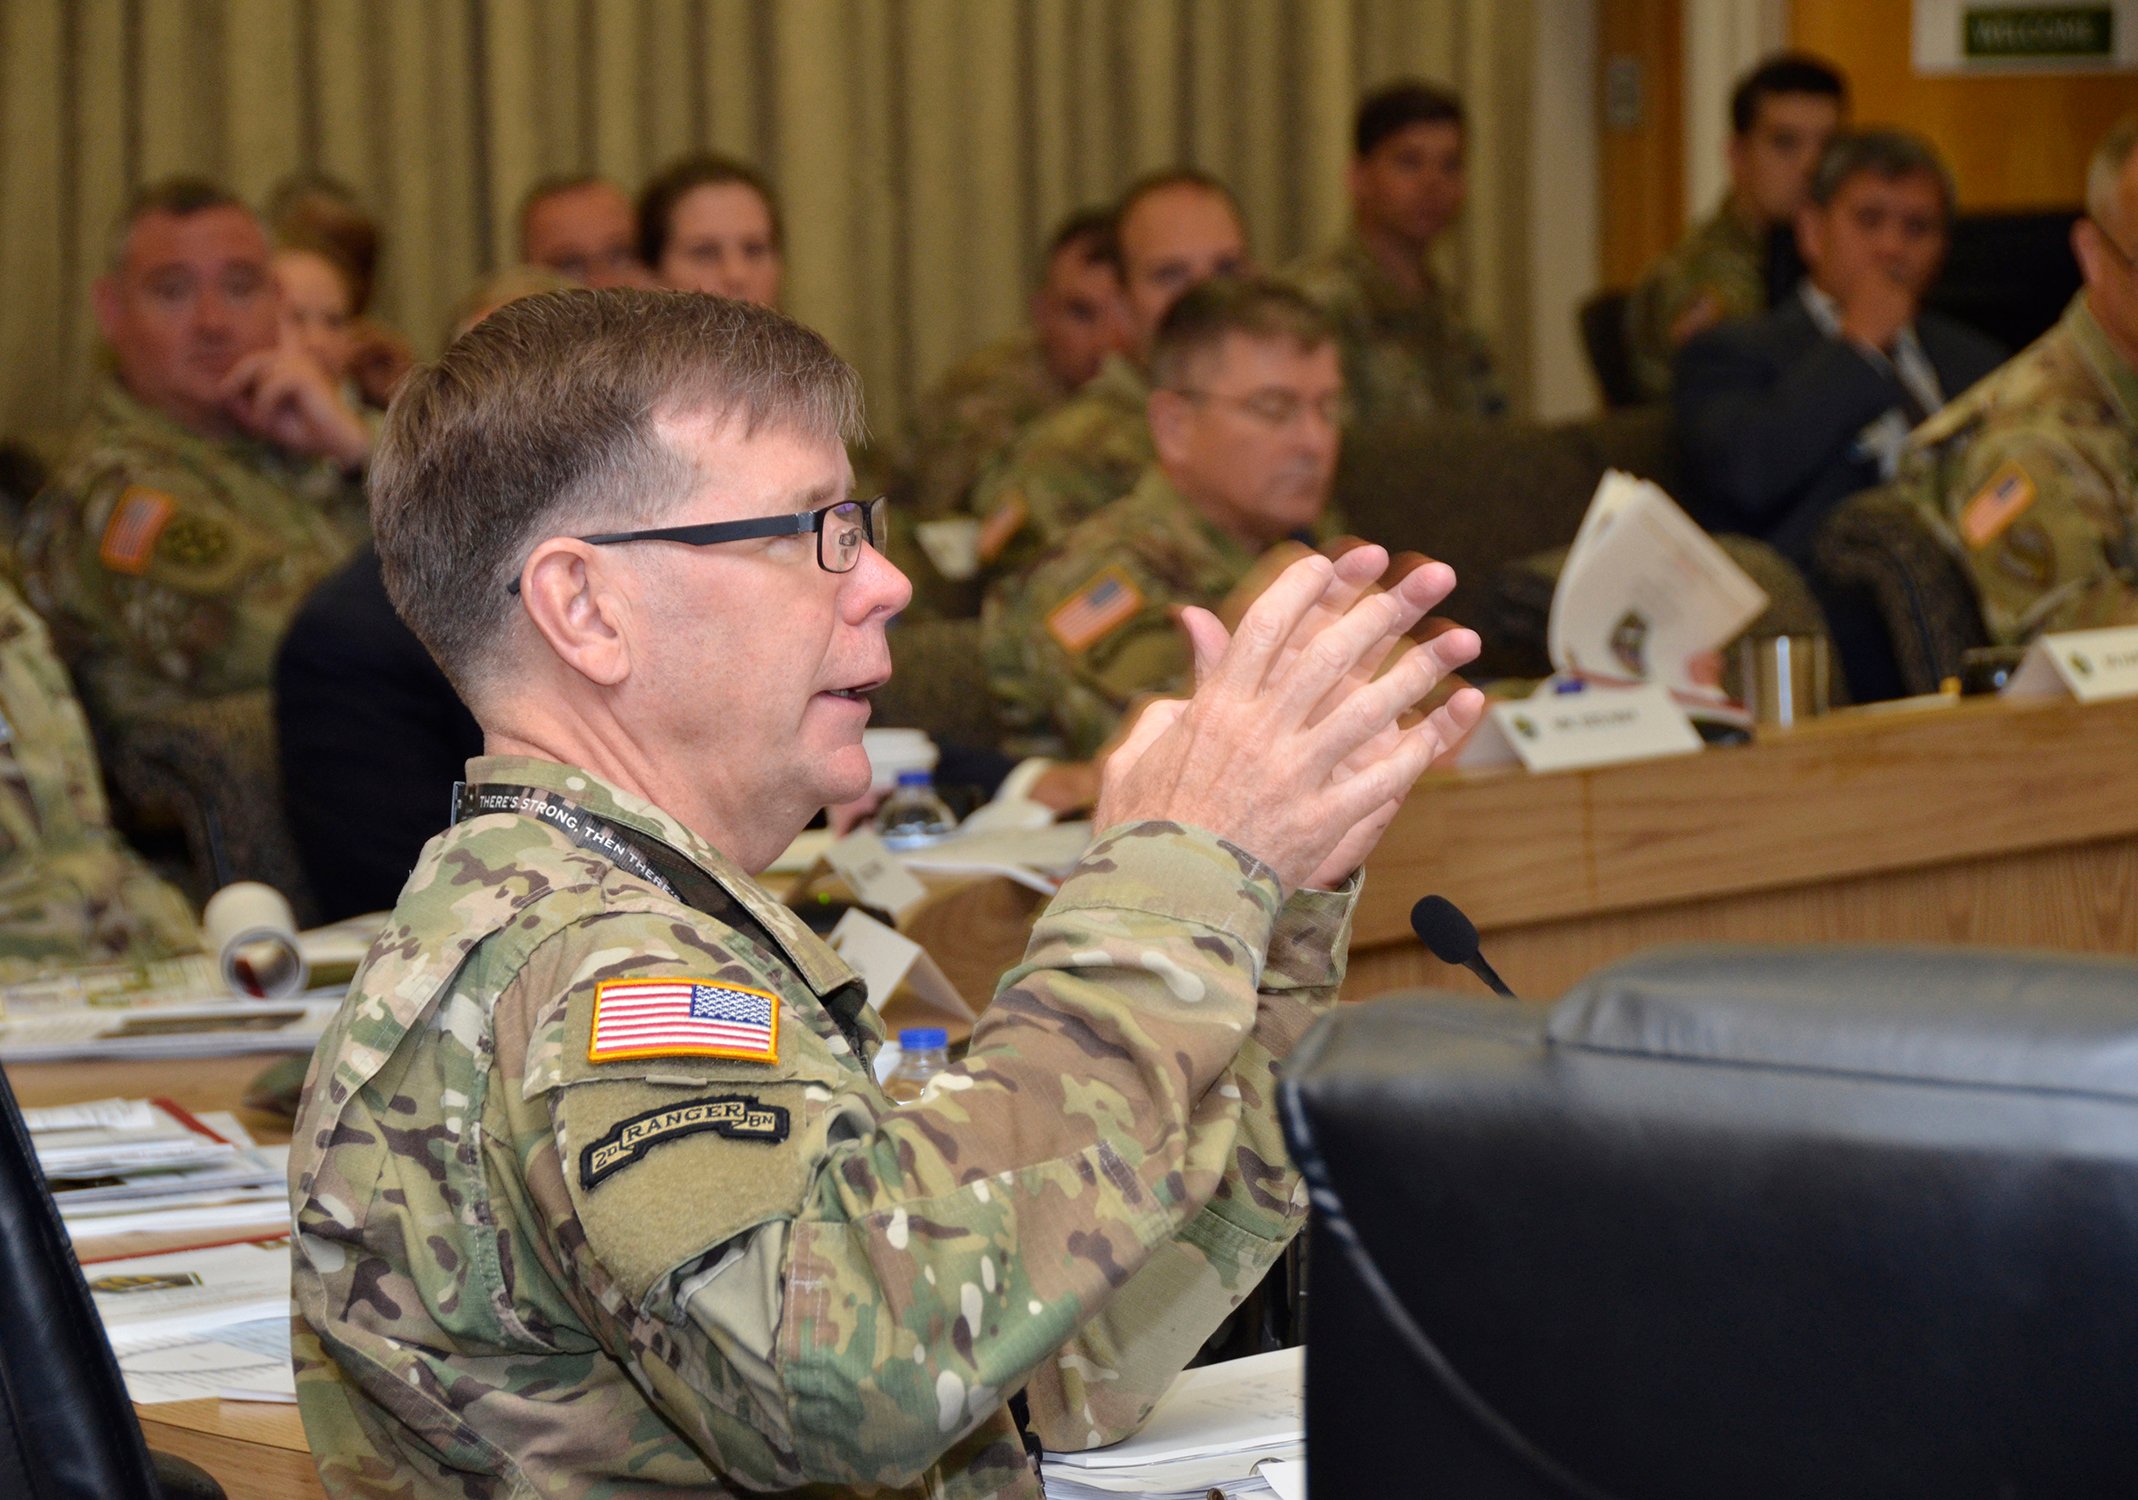 Army Wrestles With ‘Information Advantage’